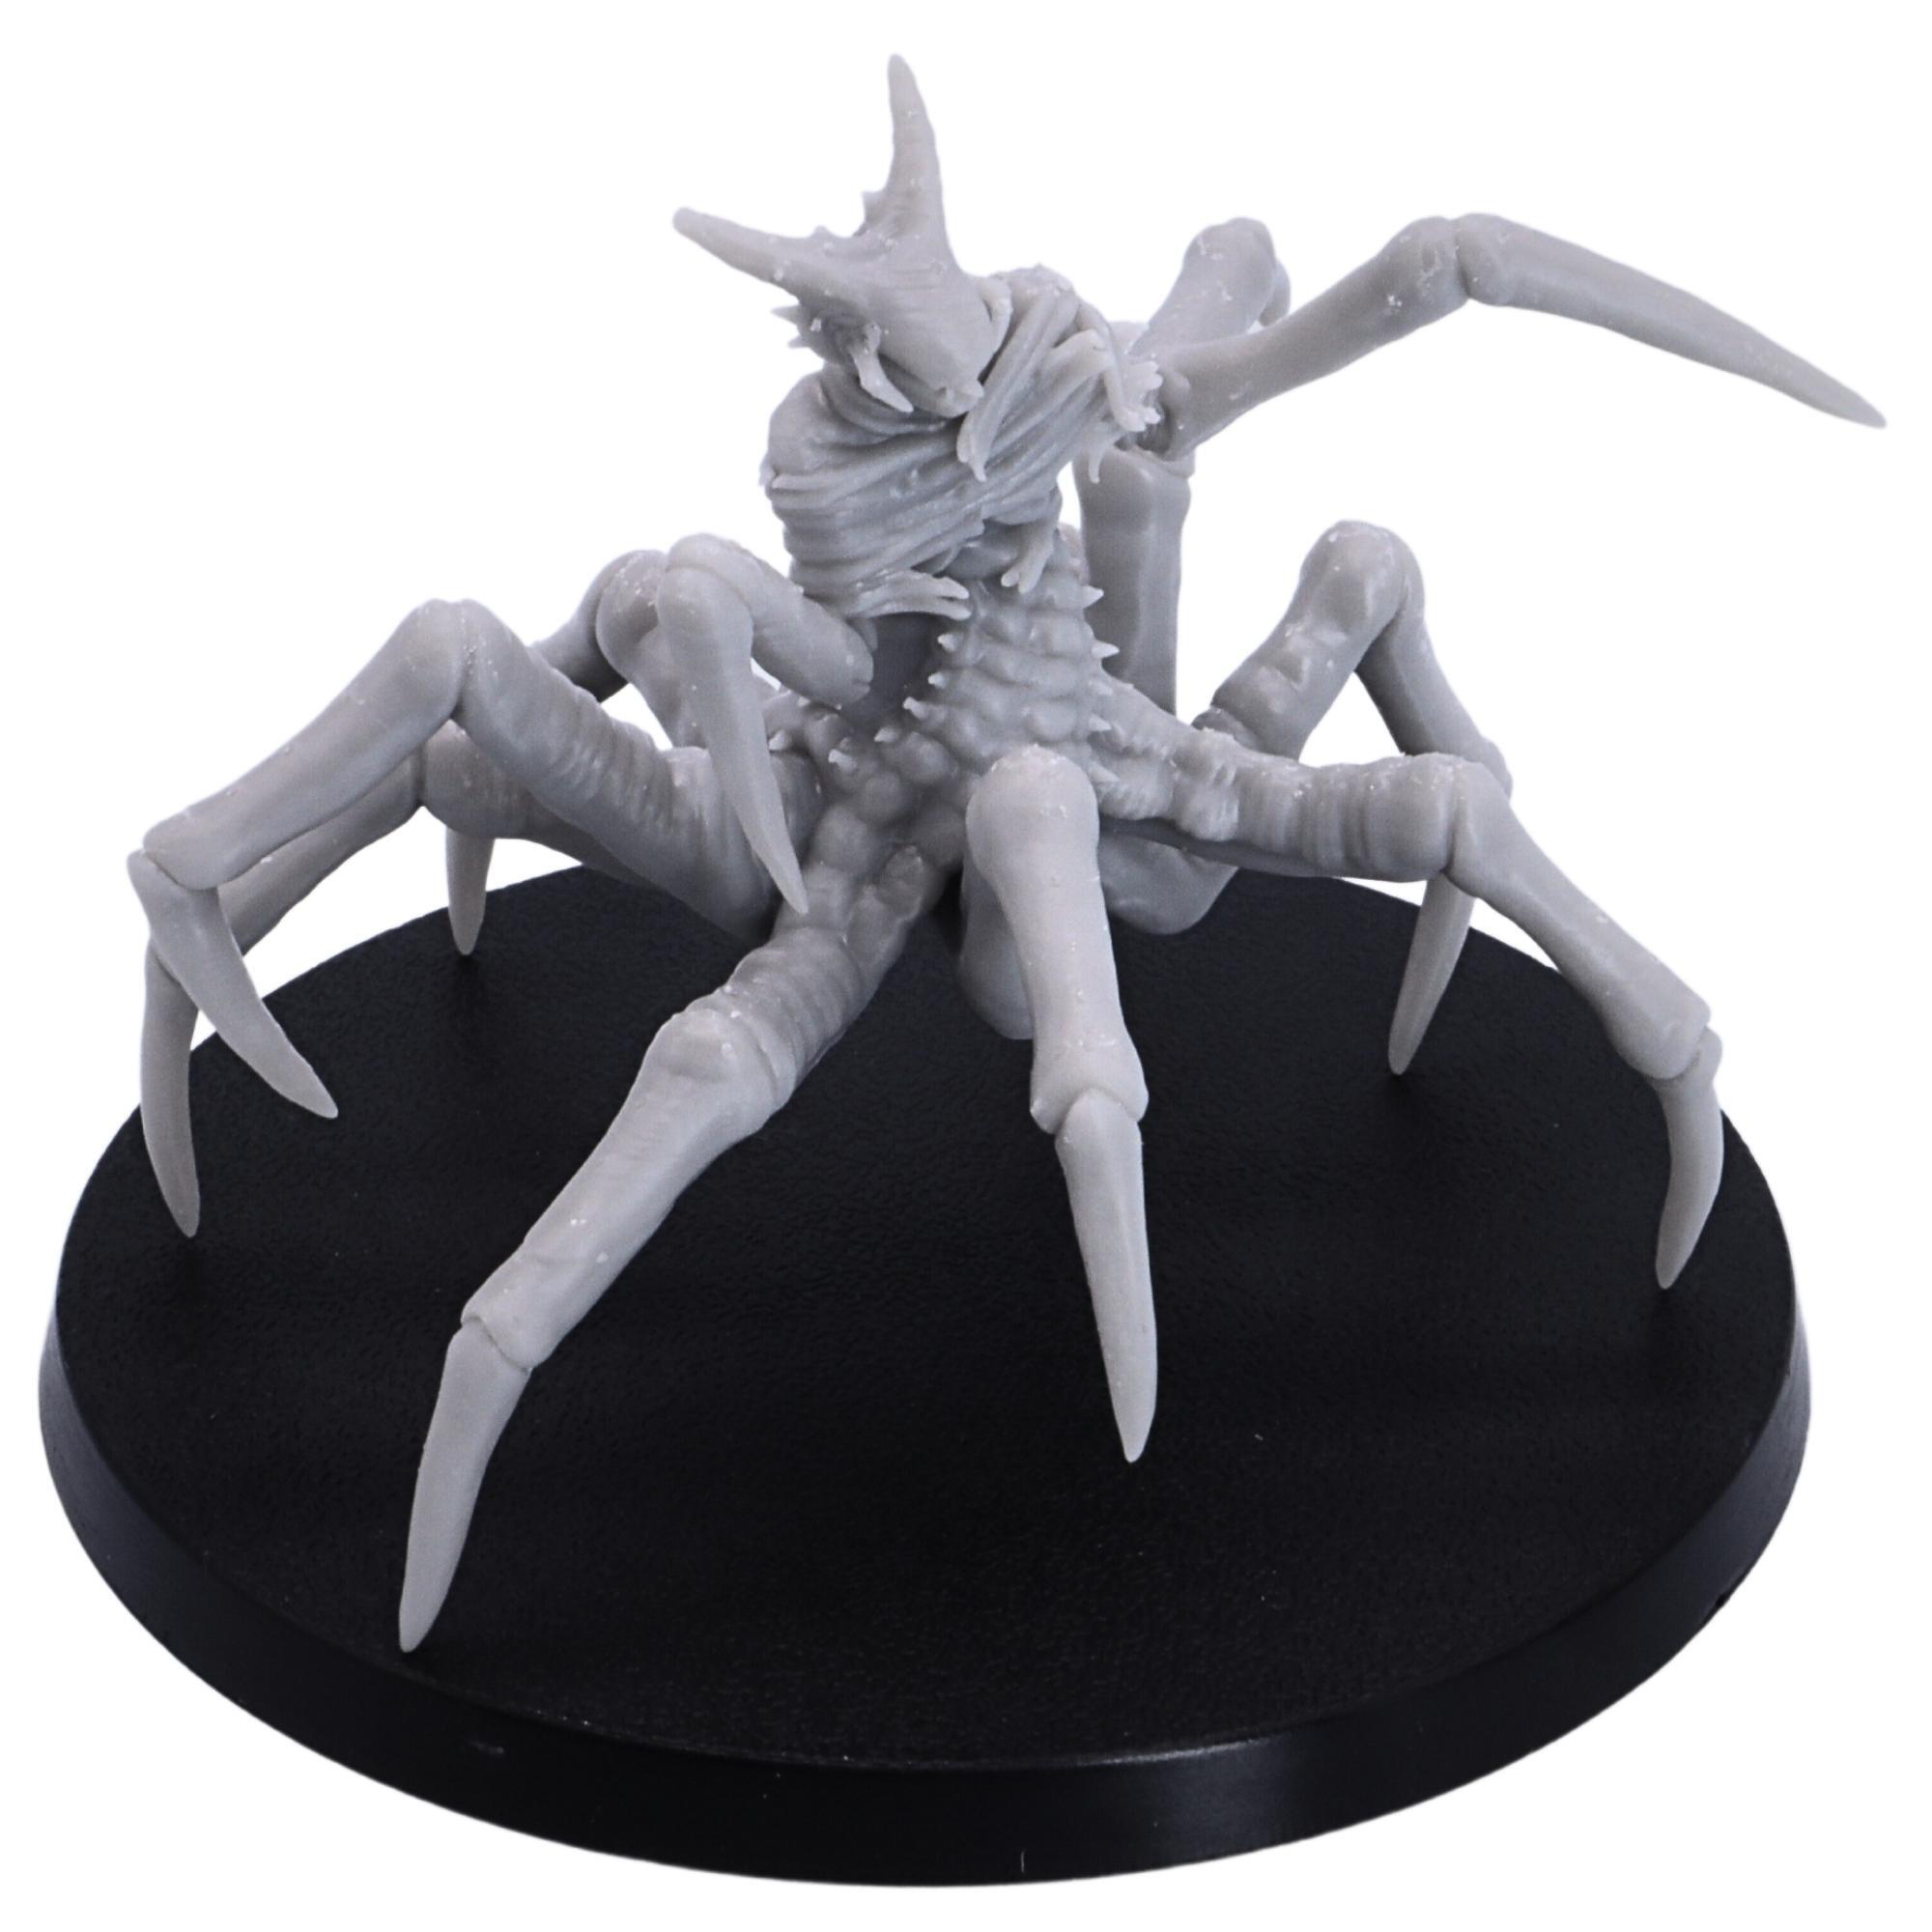 Monster creature designed by Epic Miniatures